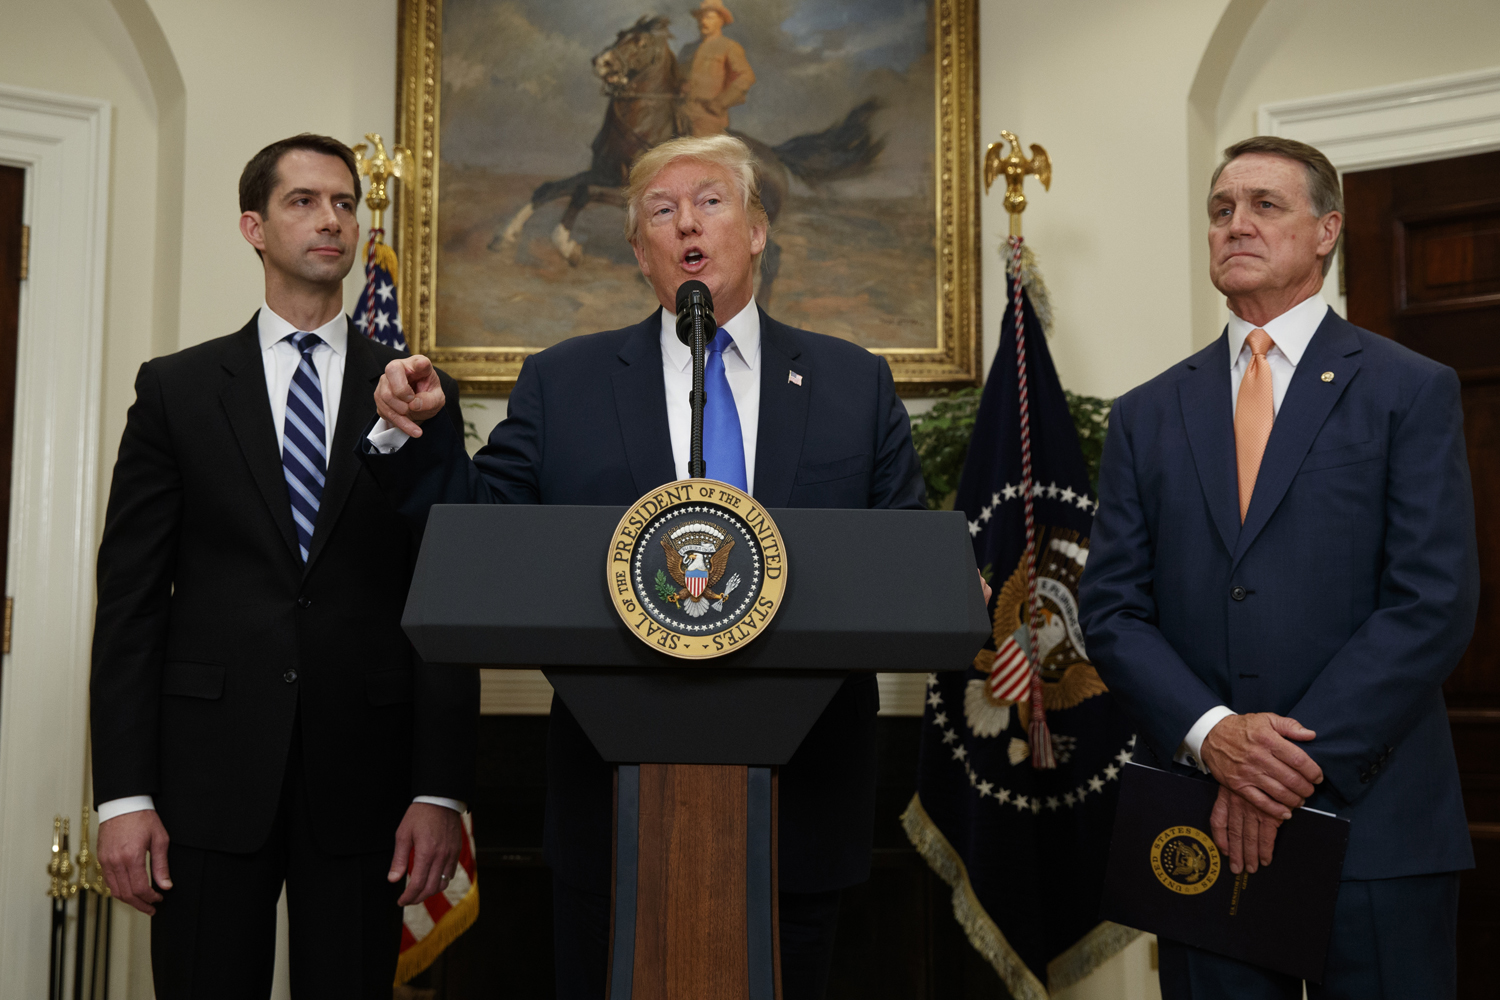 President Donald Trump, flanked by Sen. Tom Cotton, R- Ark., left, and Sen. David Perdue, R-Ga., speaks in the White House in Washington, Wednesday, Aug. 2, 2017, during the unveiling of legislation that would place new limits on legal immigration. (Evan Vucci/AP)